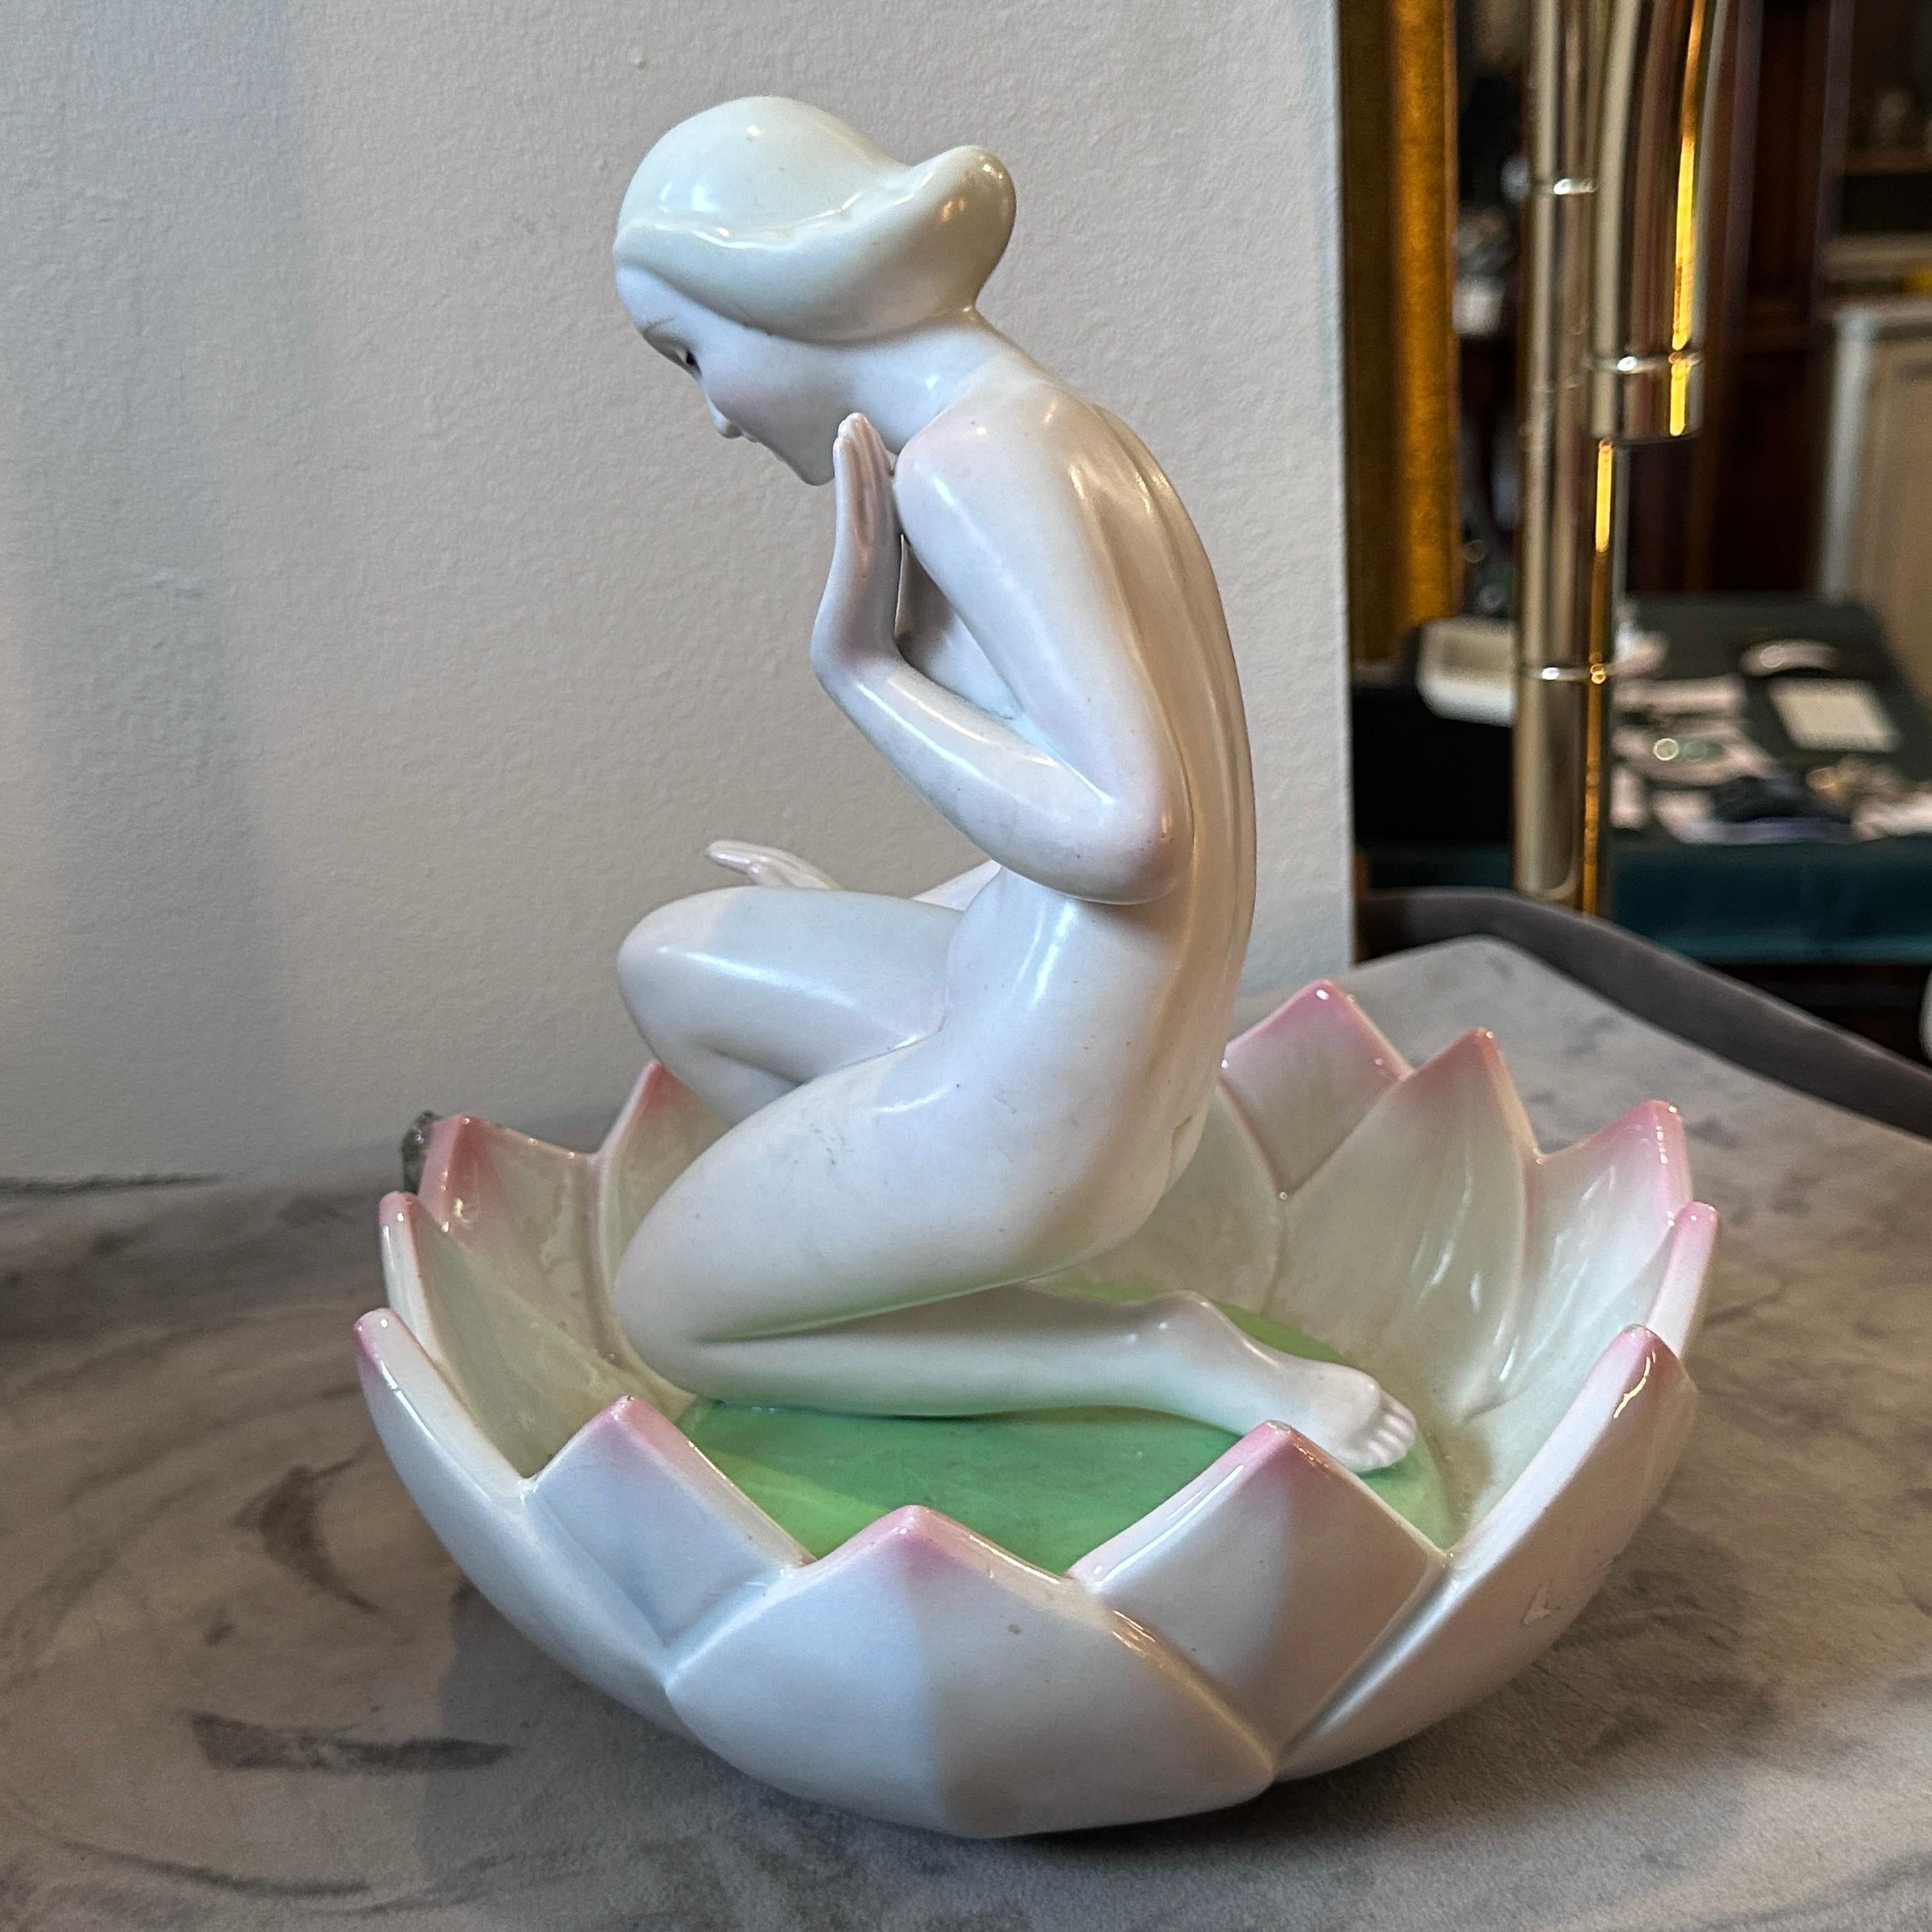 1940s Art Deco Porcelain Figure of a Woman on a Flower by Giovanni Ronzan For Sale 3